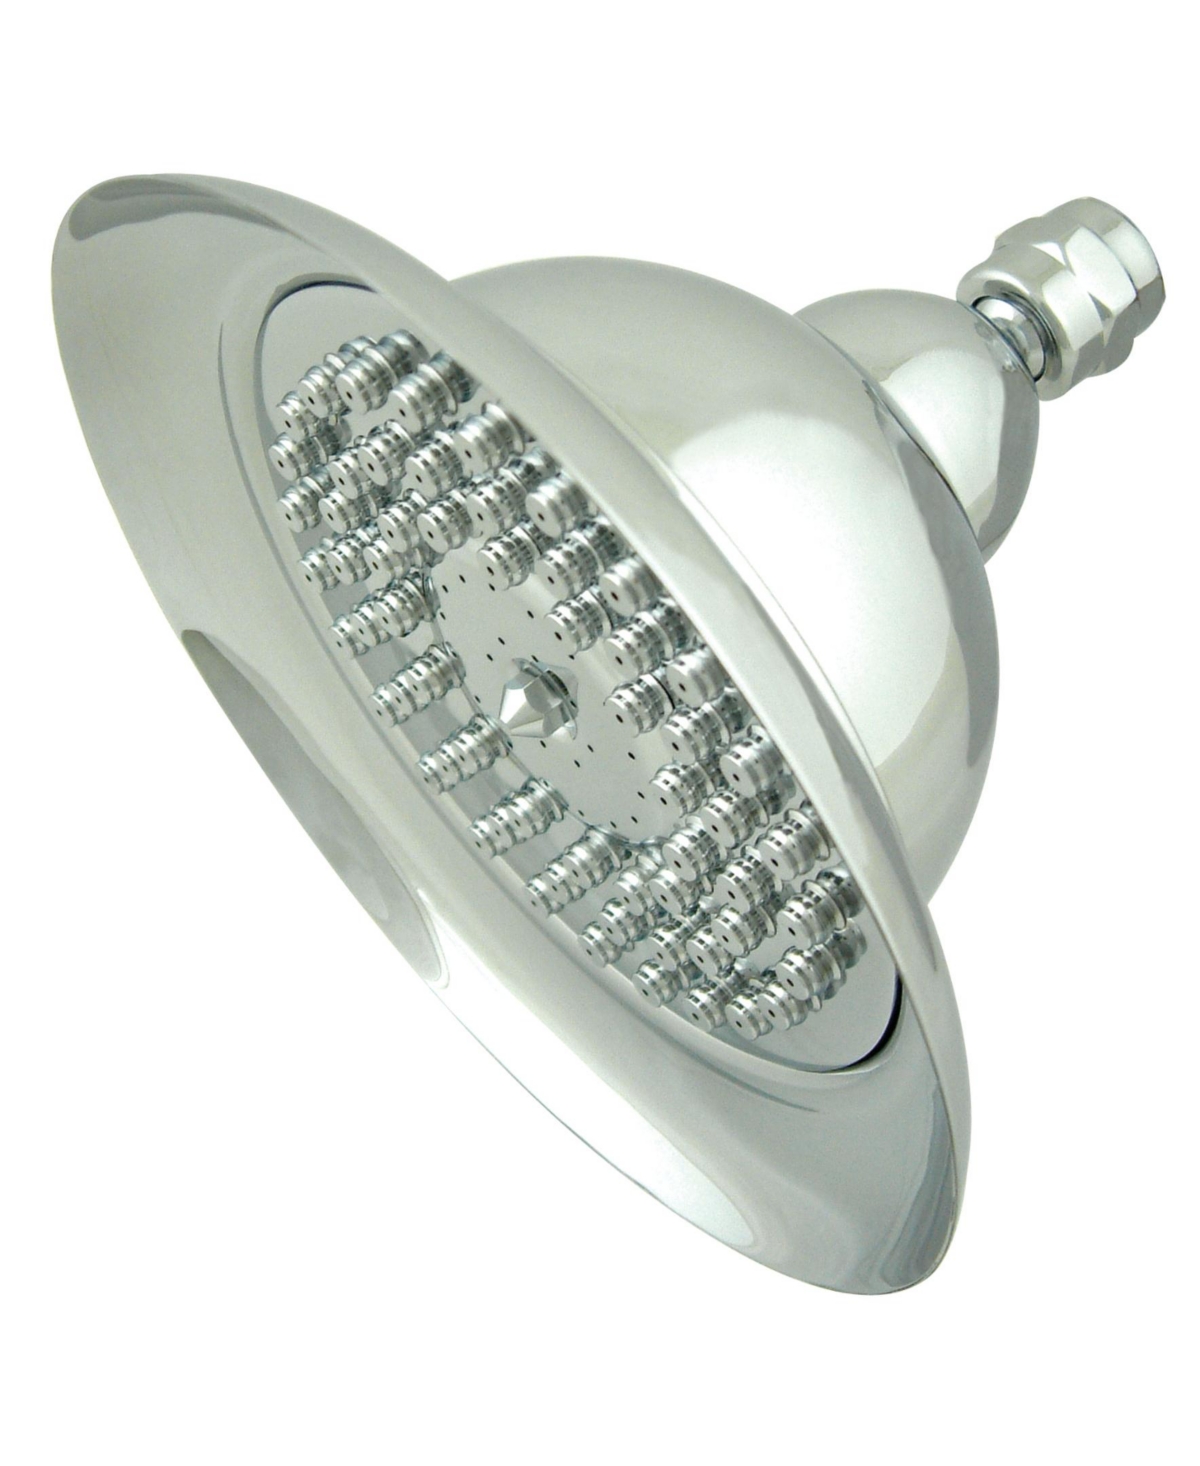 Kingston Brass Victorian Bell Showerhead in Polished Chrome Bedding